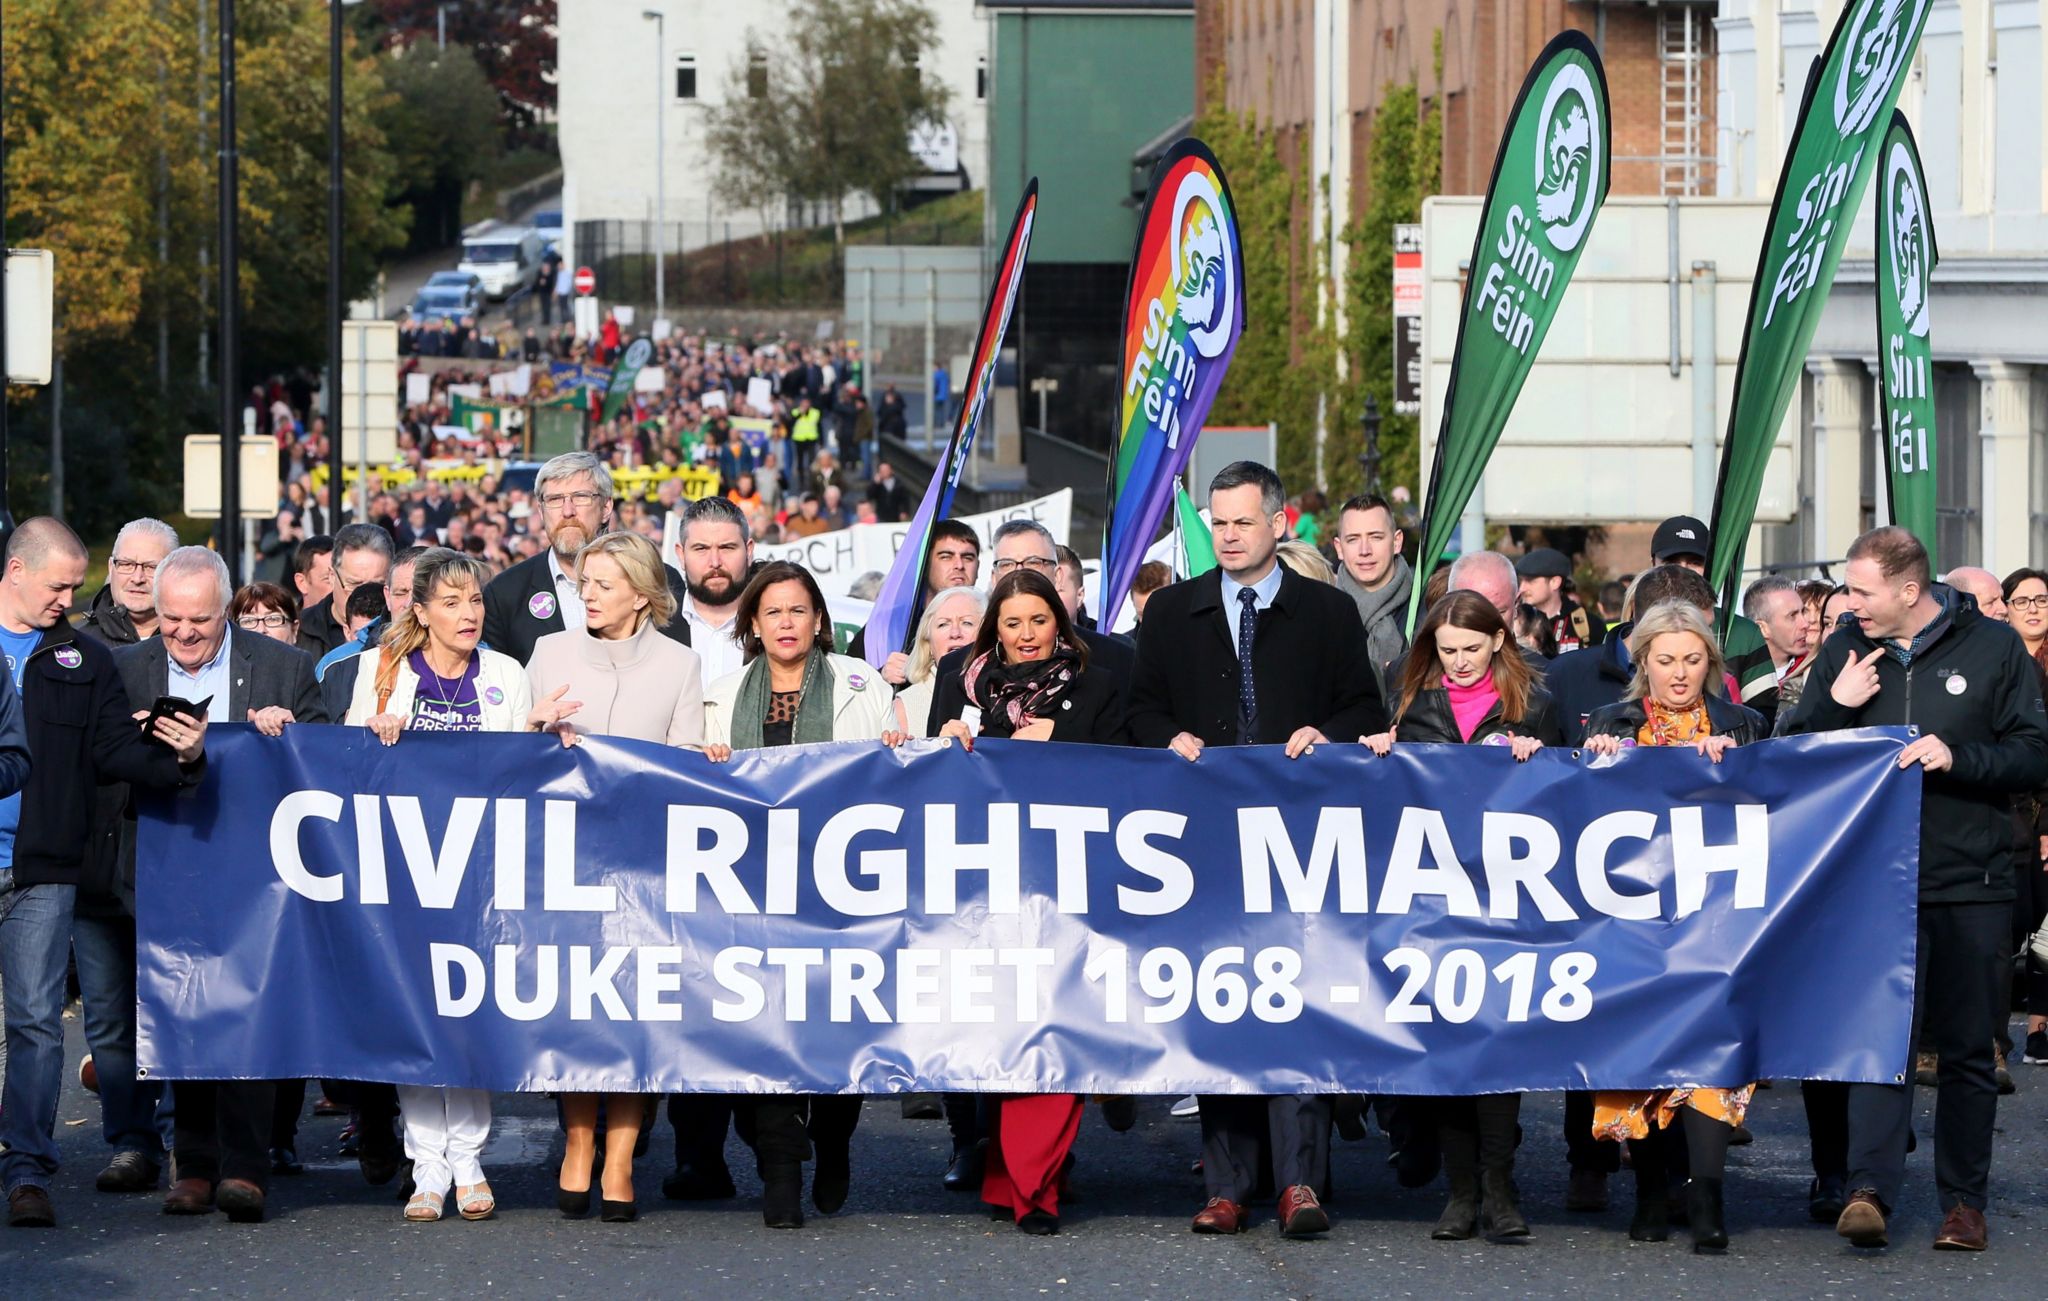 Sinn Féin held a rally in Derry to mark the 1968 civil rights march.